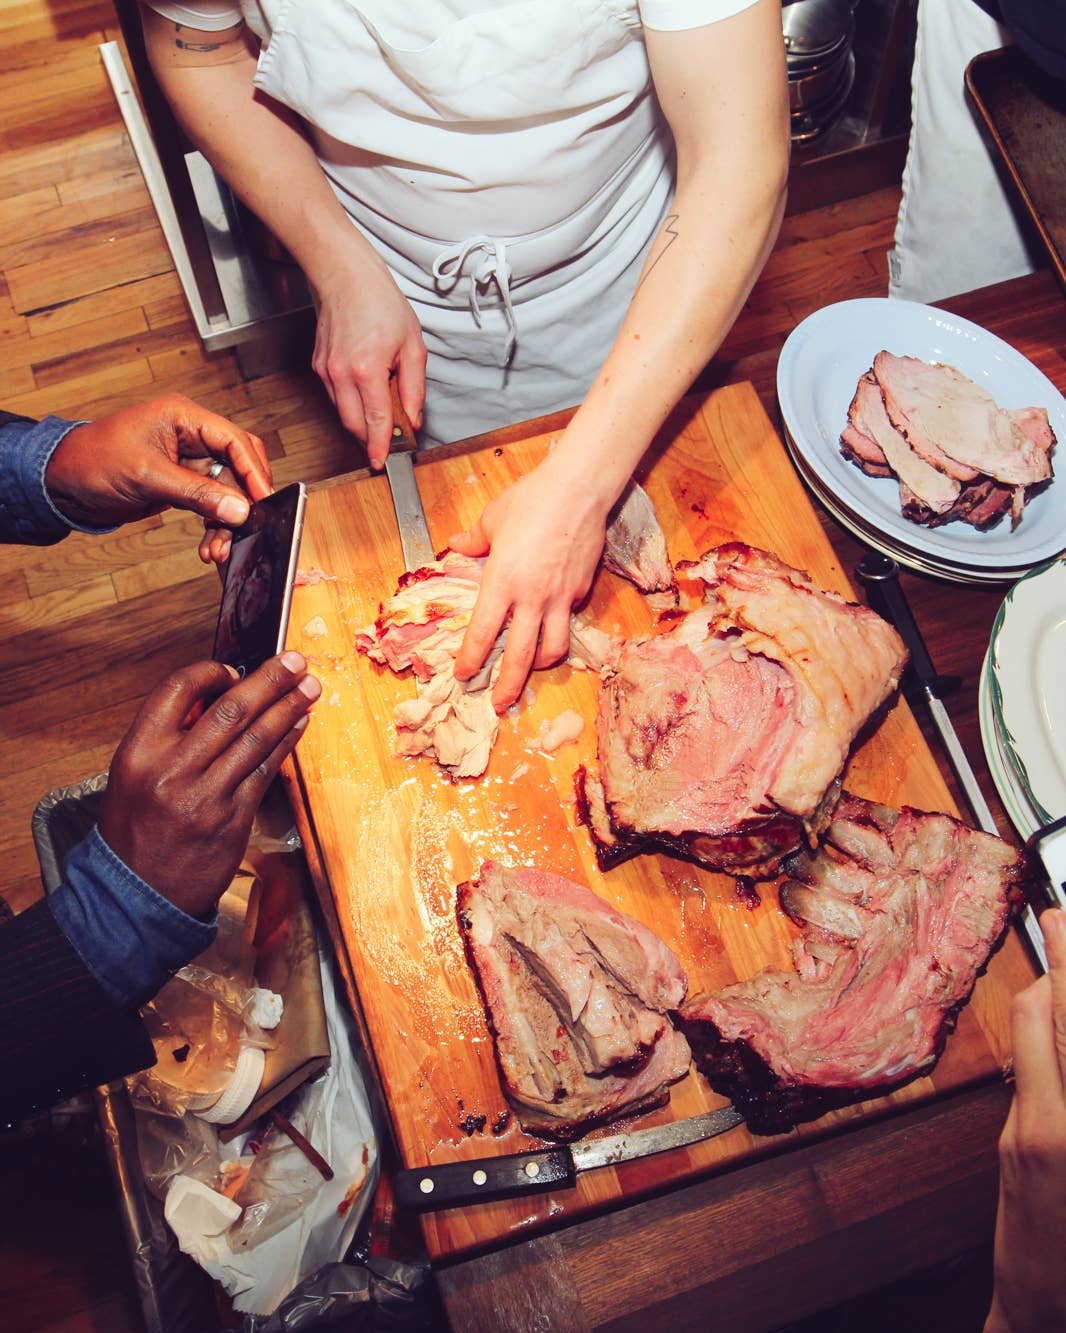 Our Bourbon-Fueled Feast with Wild Turkey and The Meat Hook